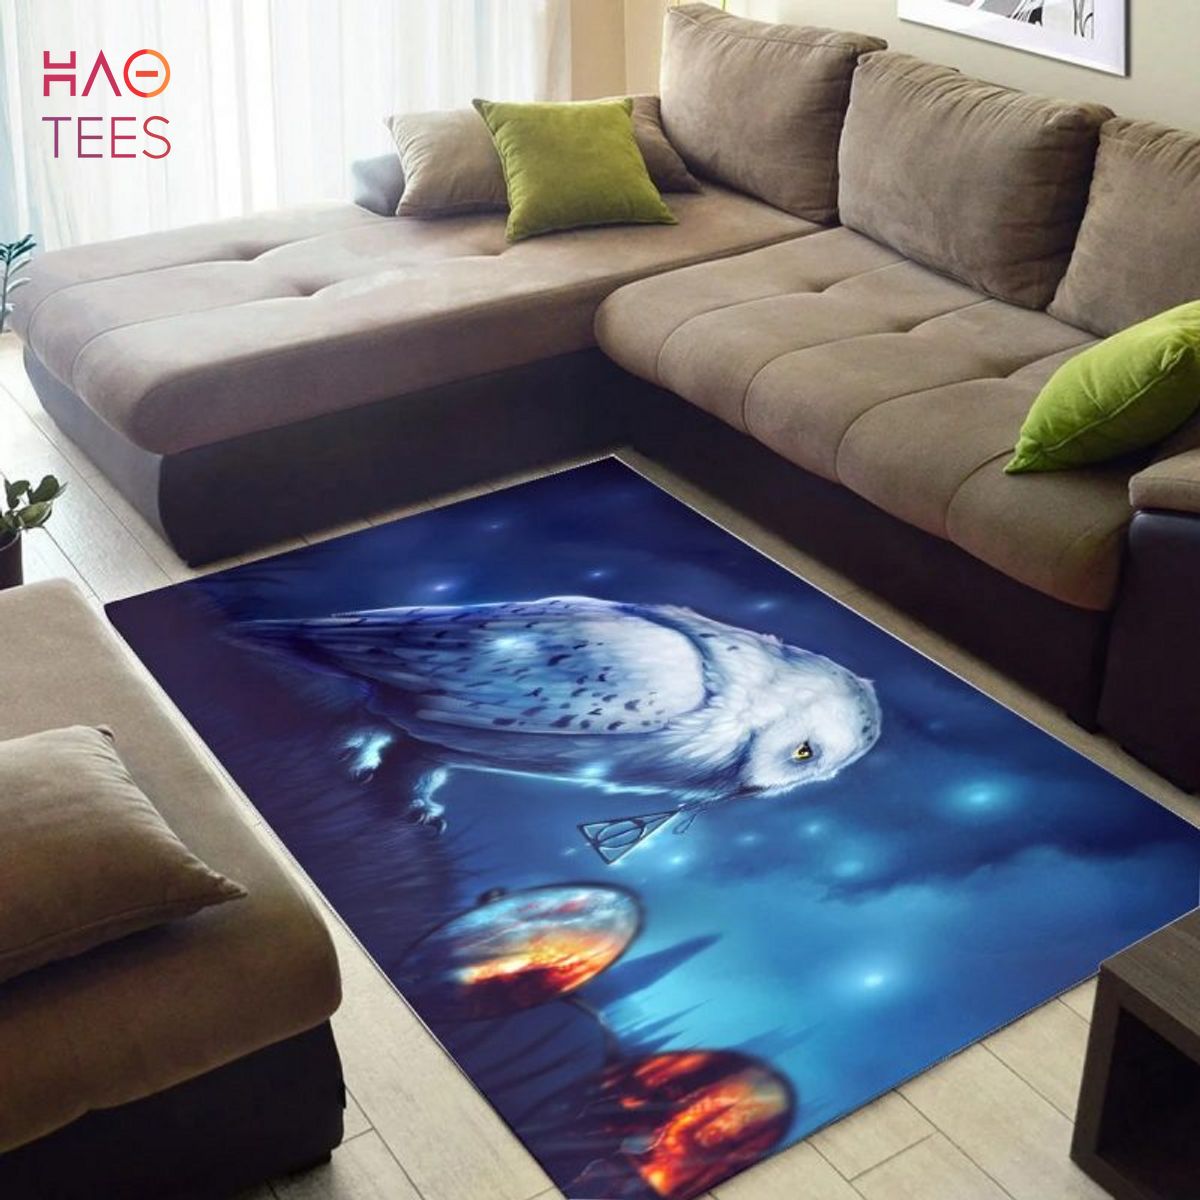 BEST Harry potter and deathly hallows rugs living room capet